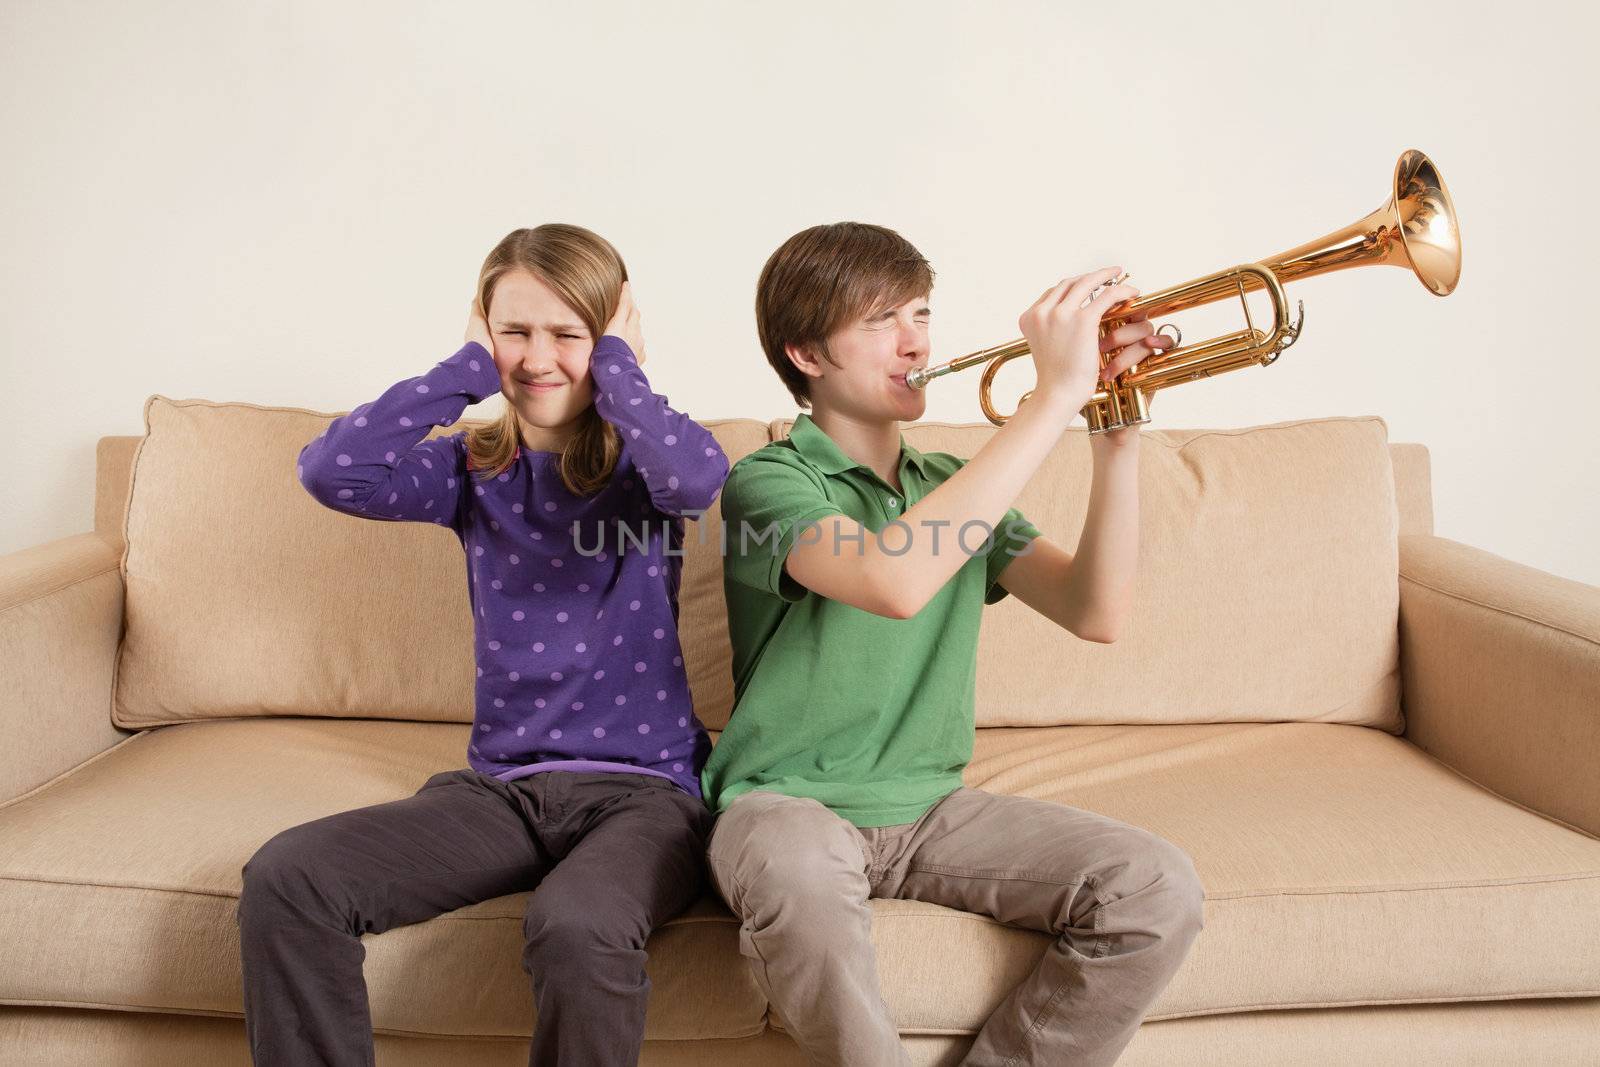 Photo of a brother playing his trumpet too loudly, or badly, and annoying his sister.